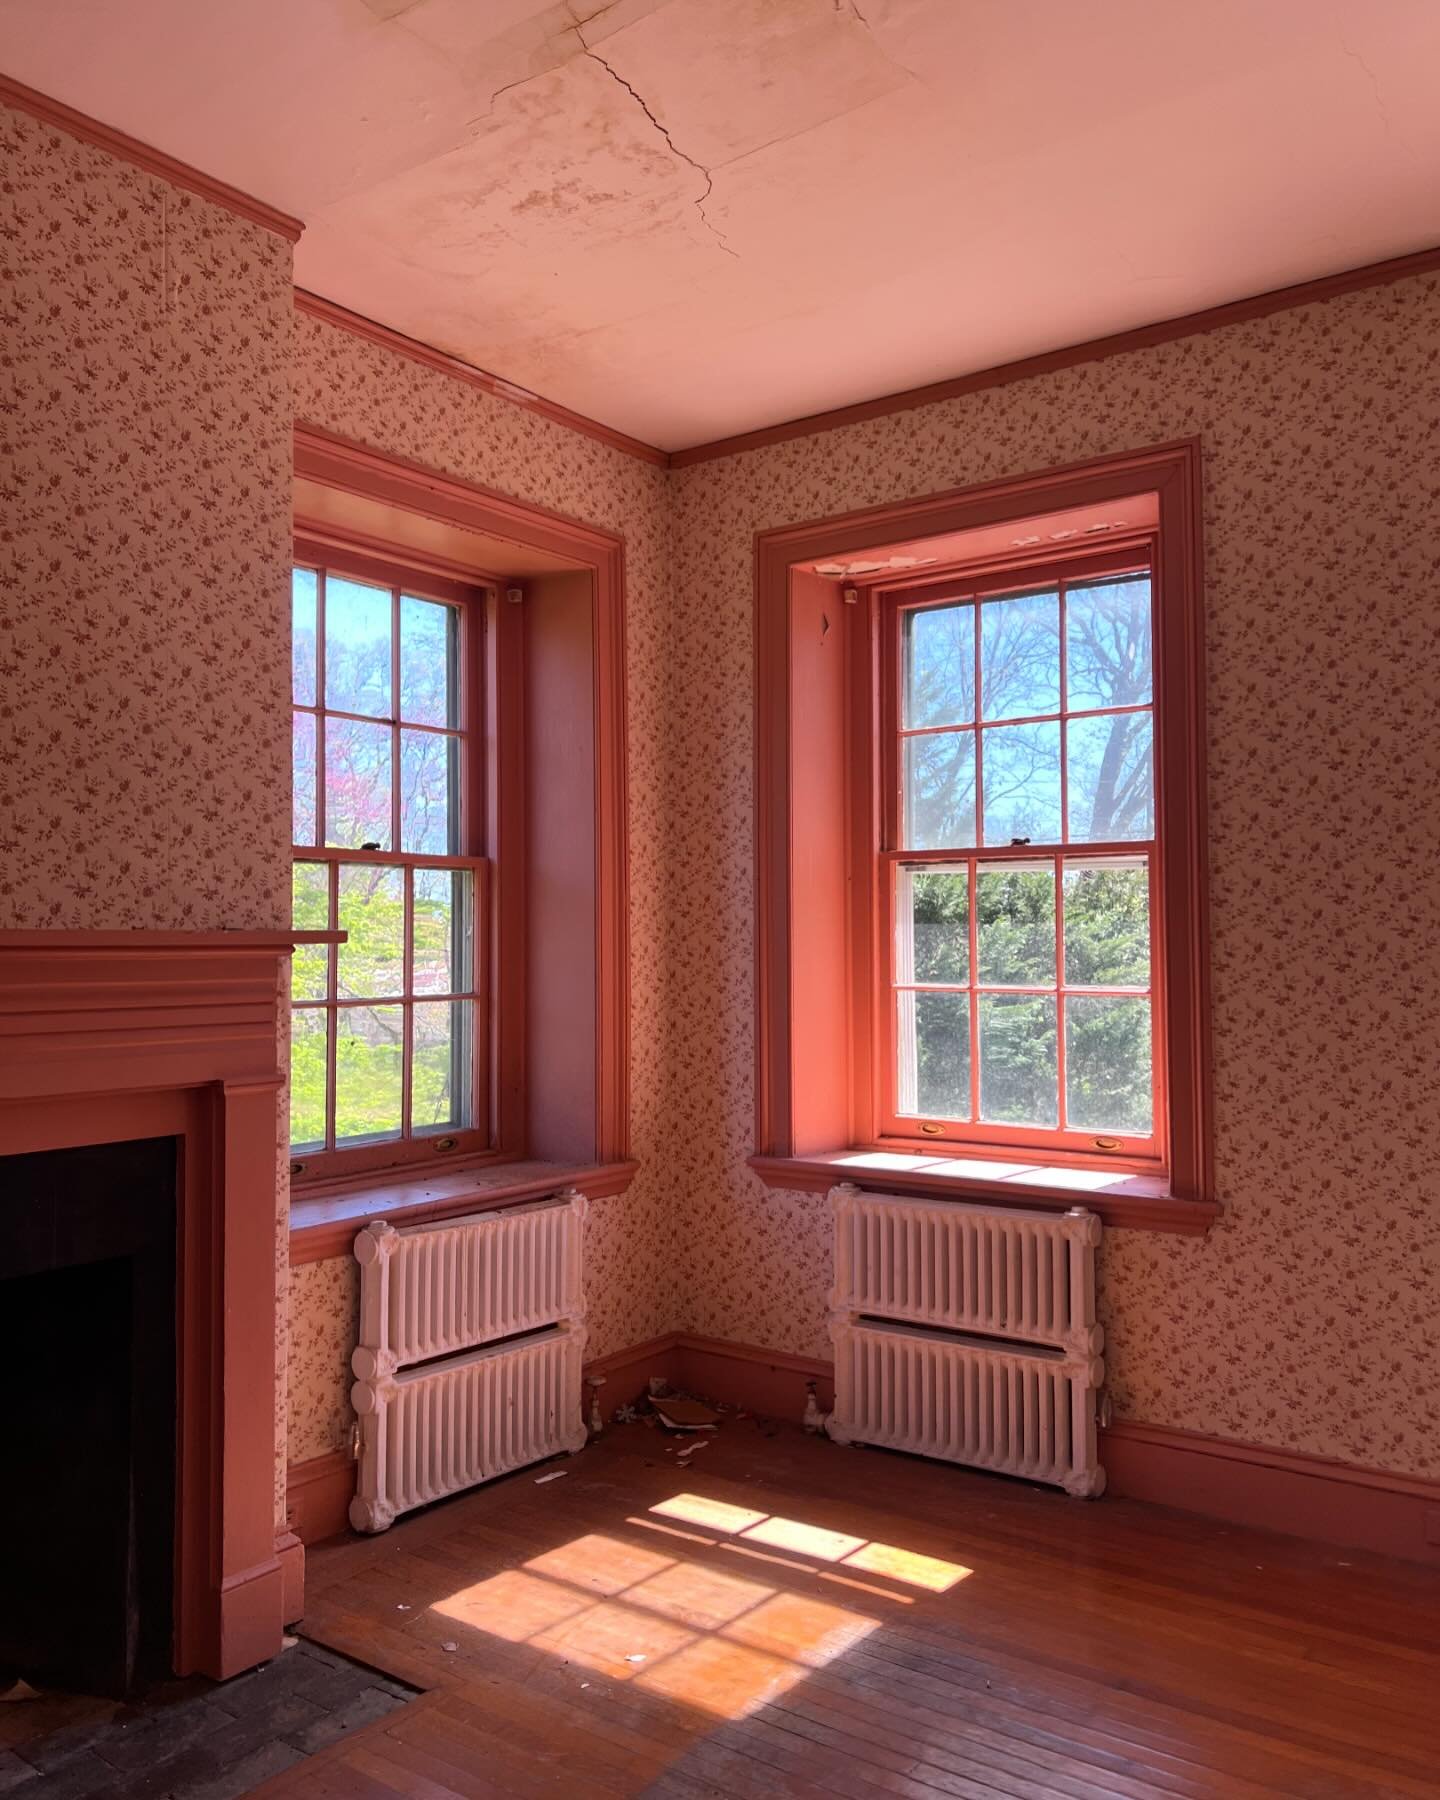 What a normal day looks like touring haunted mansions in northern NJ. So many beautiful textures, colors, and spaces. And surprises!
.
.
.
(Sidenote- I never bring judgment when I view a space though I will bring a good sense of humor. It&rsquo;s alw